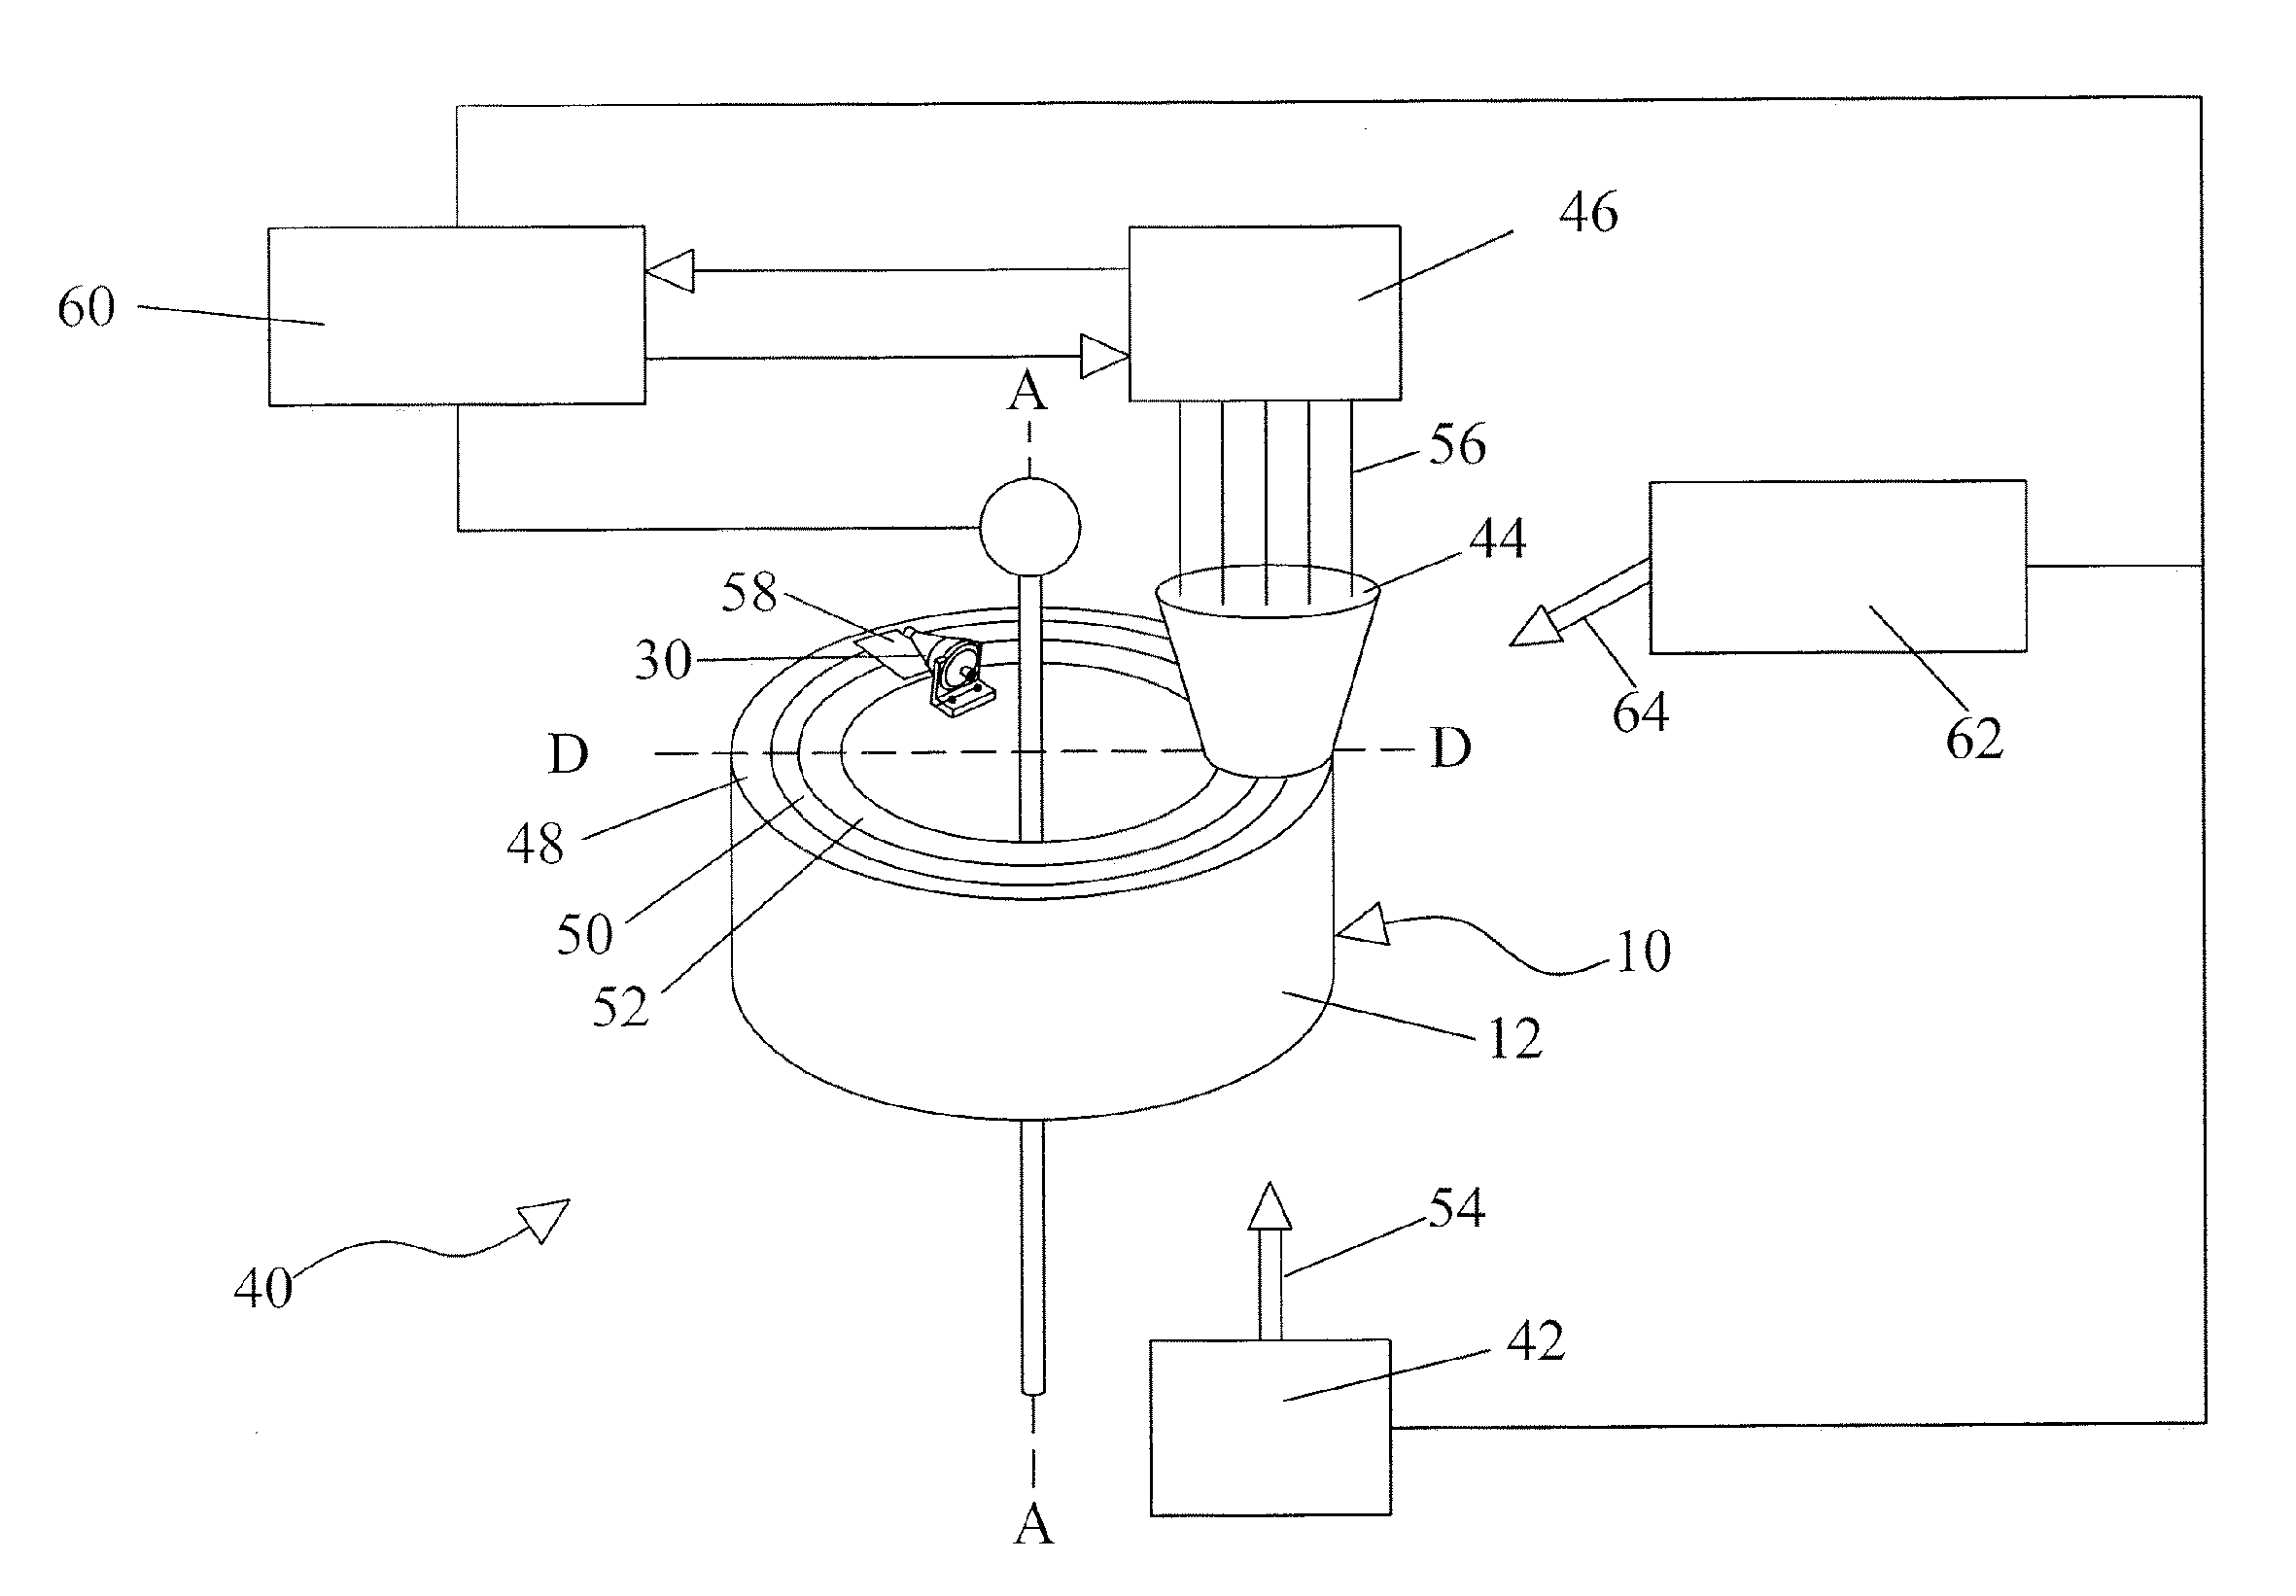 Blood processing apparatus with controlled cell capture chamber and method background of the invention